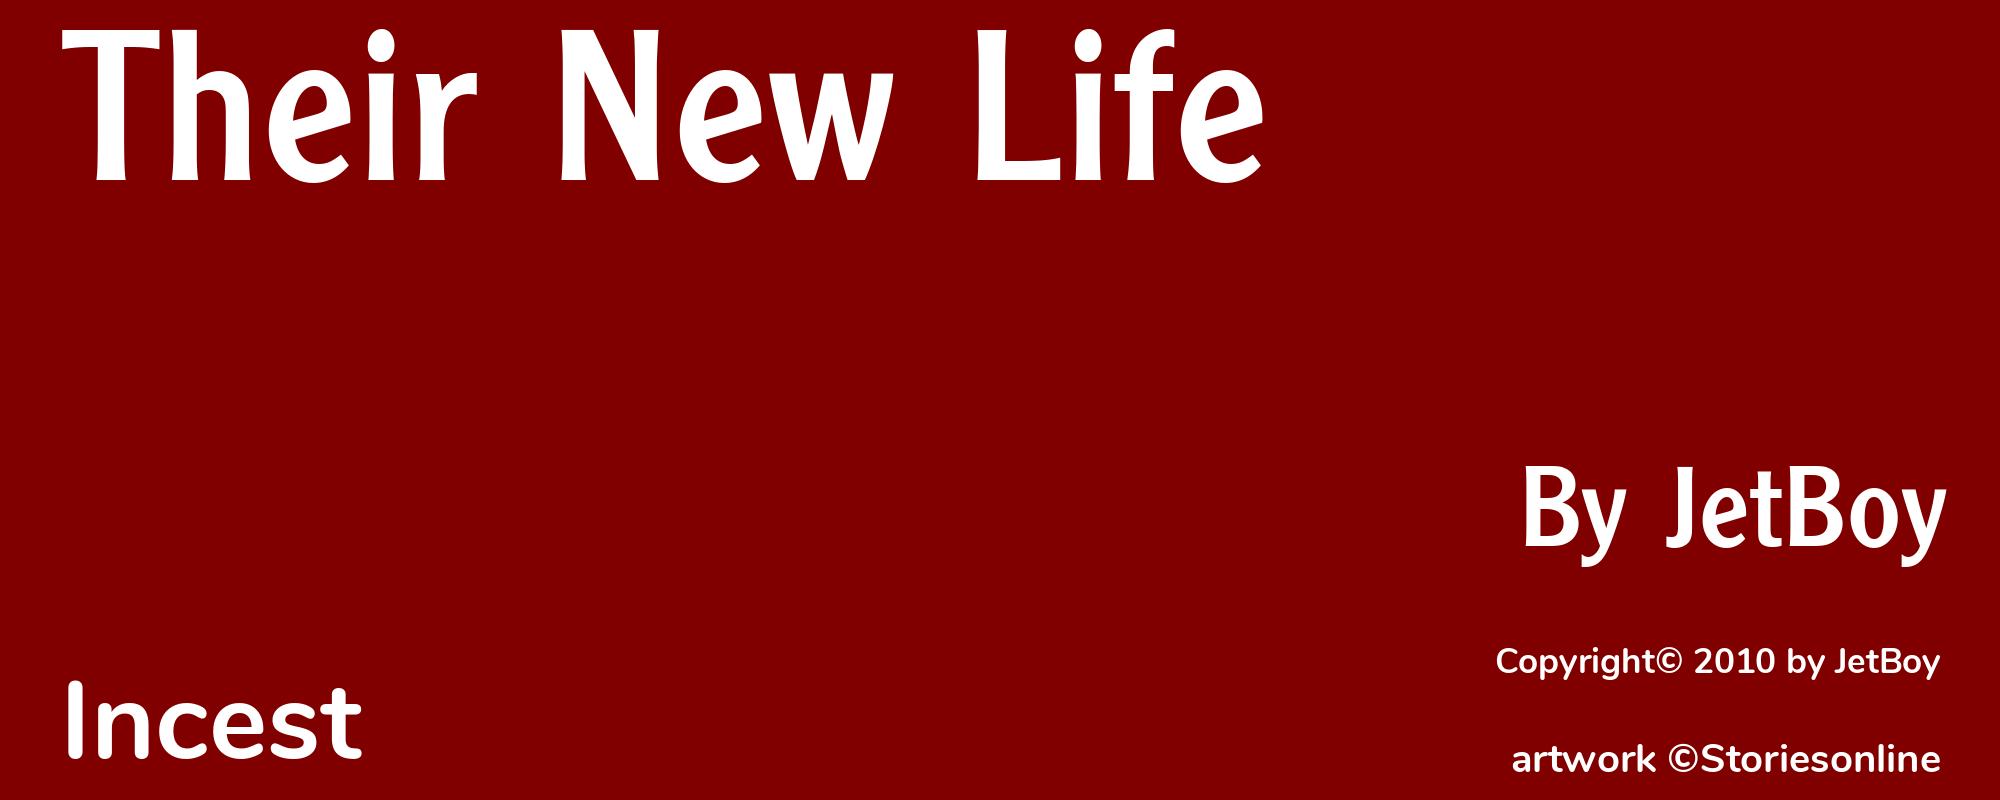 Their New Life - Cover